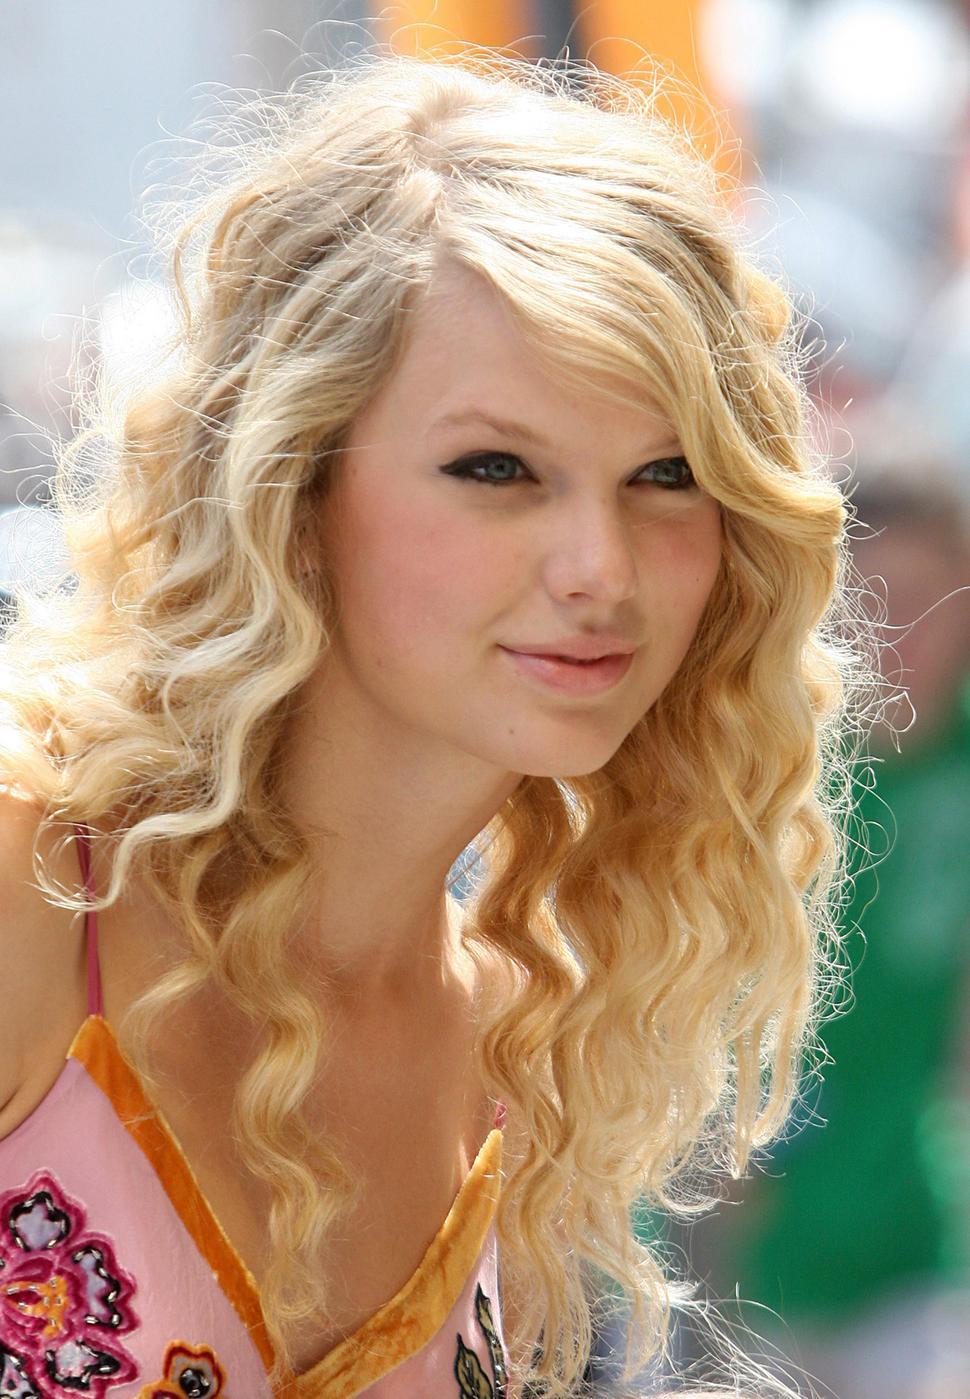 Taylor Swift Curly Hair 4 by TaylorSwiftTribute on DeviantArt